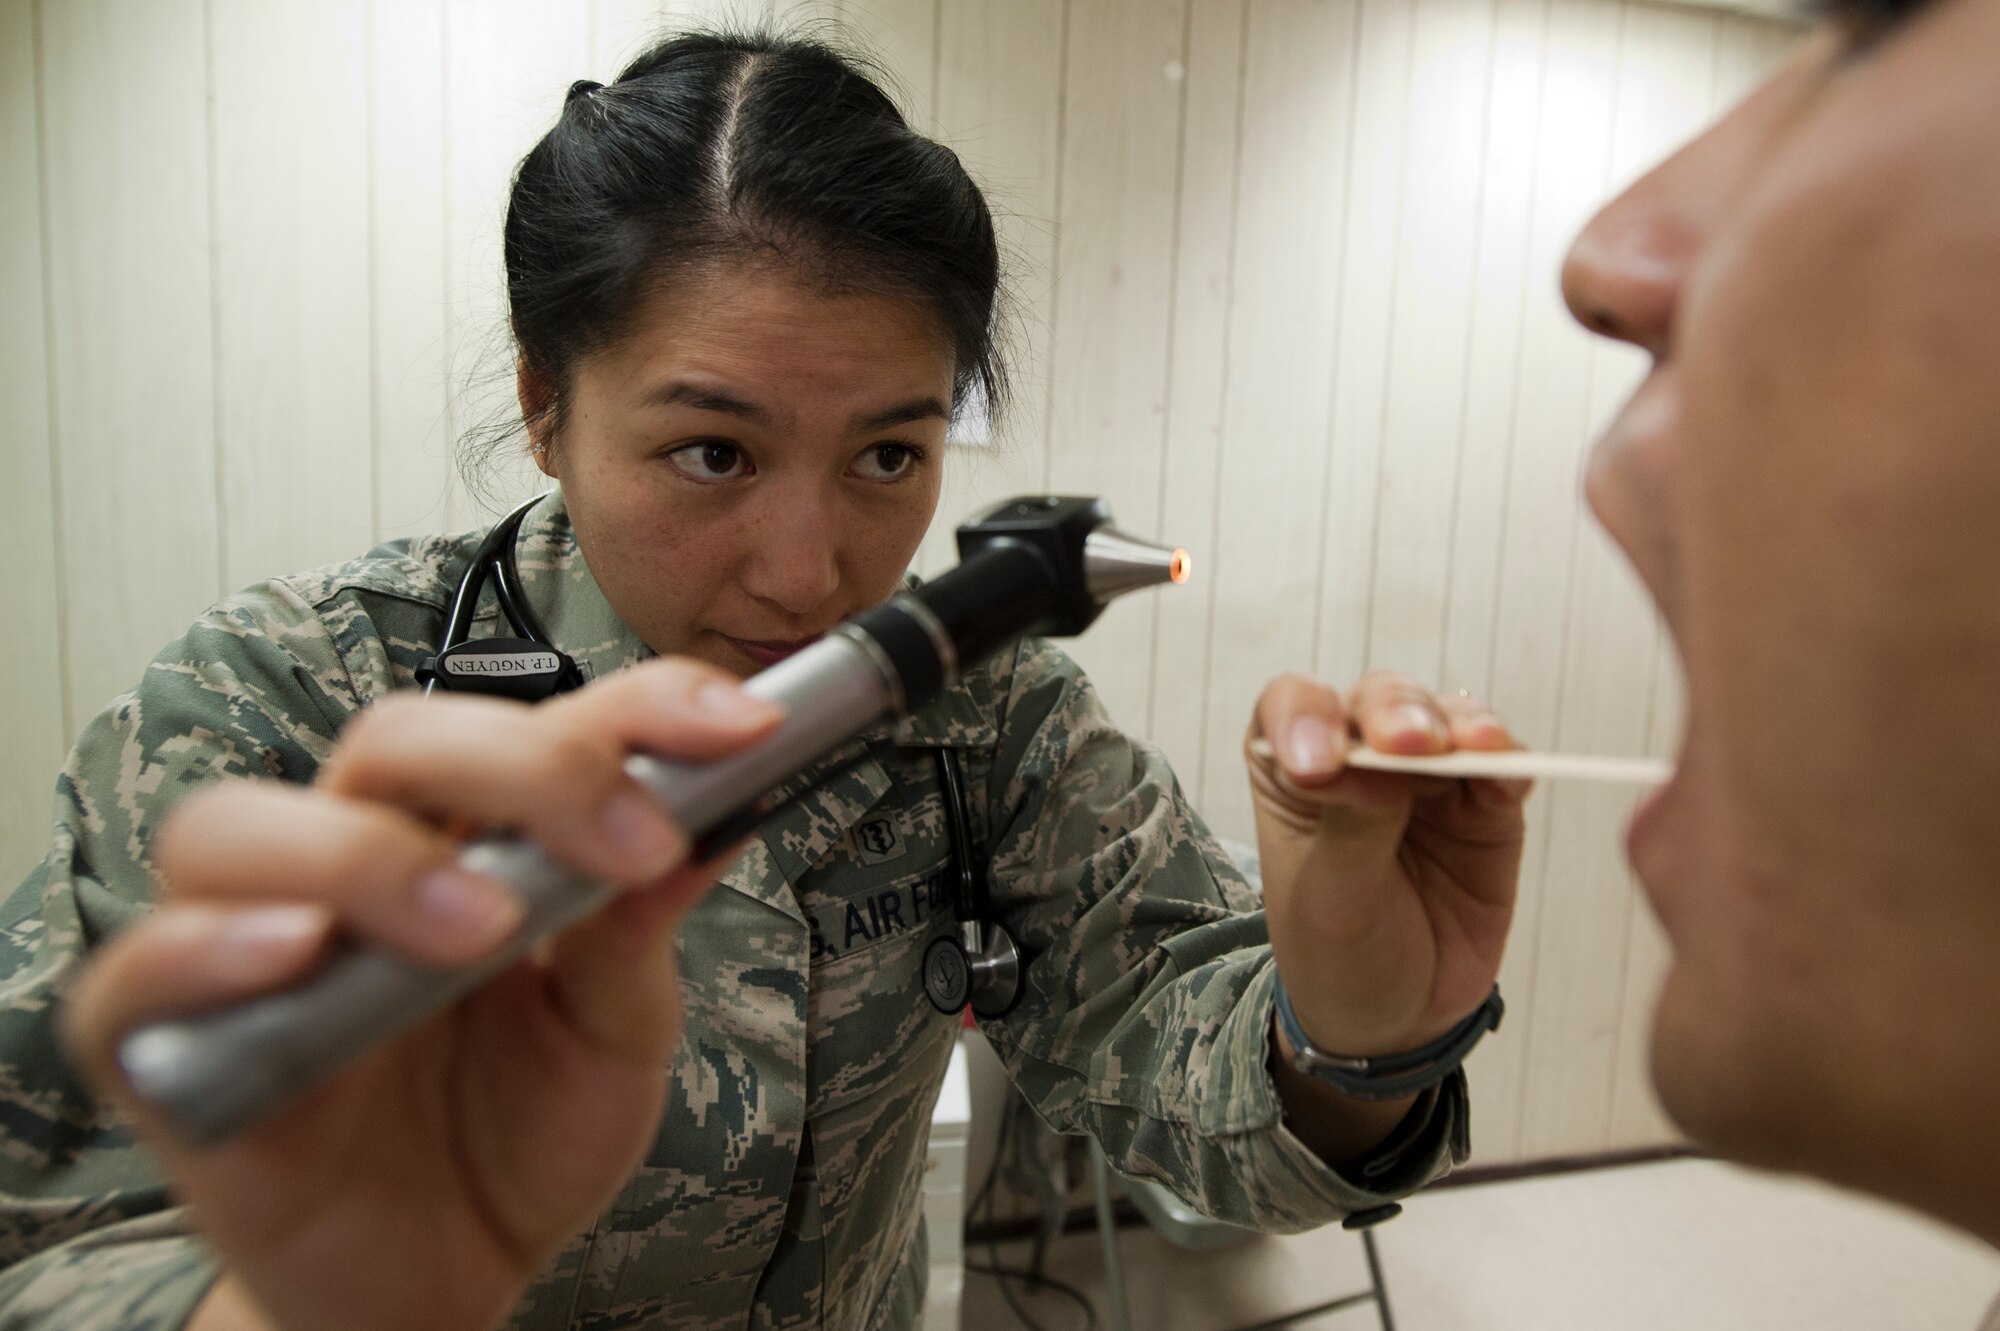 Capt. Thiennga Nguyen, 332nd Expeditionary Medical Group doctor, checks the back of a patients throat during a routine examine at an undisclosed location in Southwest Asia, Jan. 19, 2012. The examination can reveal signs of infection. Nguyen is deployed from Misawa Air Base, Japan and is a native of Albuquerque, N.M. (U.S. Air Force photo by Staff Sgt. Joshua J. Garcia/Released)